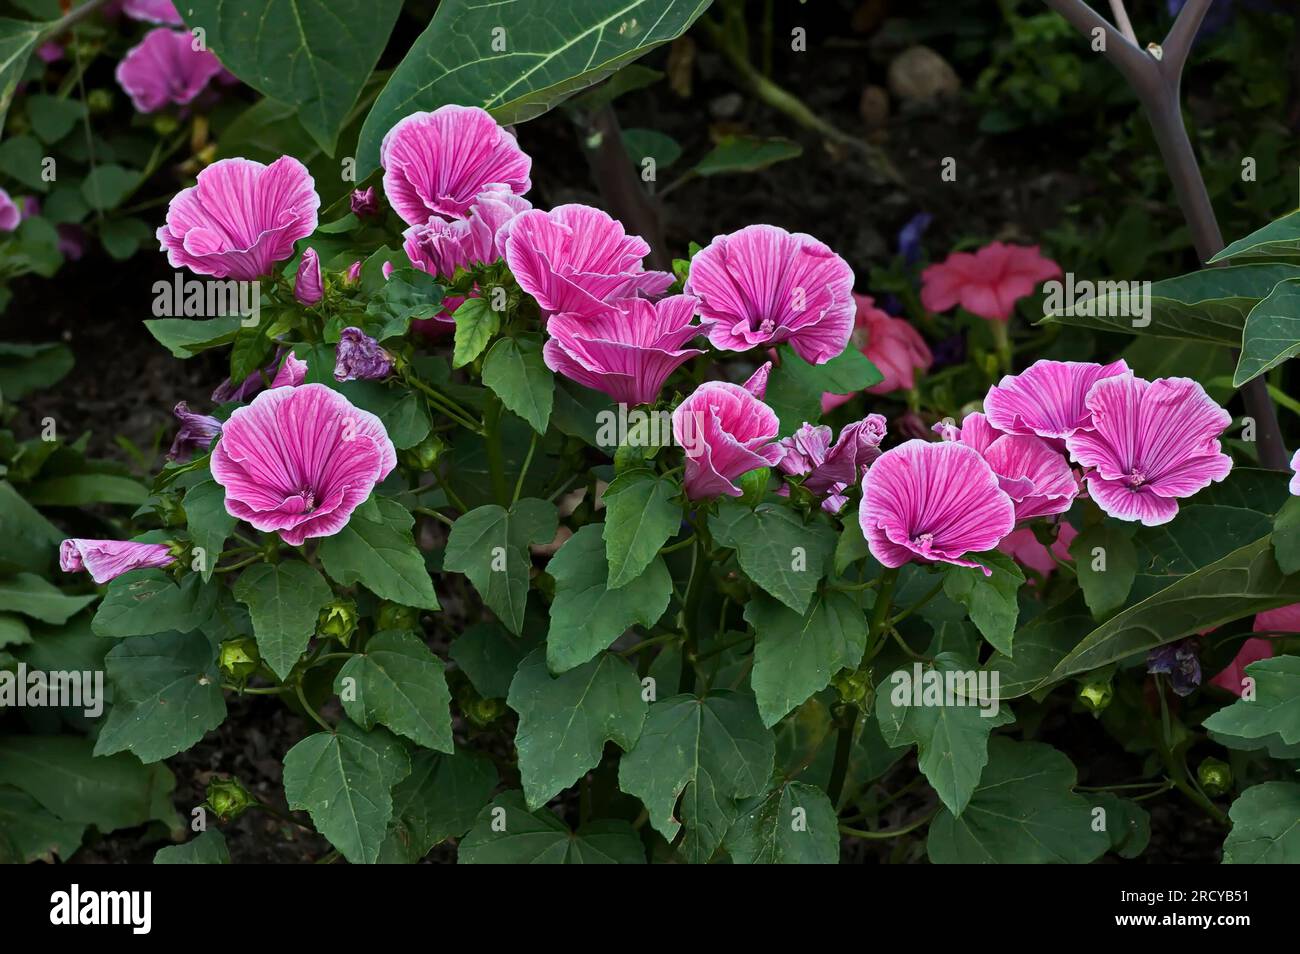 A beautiful view from a garden with lots of bright pink lavatera flowers with lush foliage, Sofia, Bulgaria Stock Photo